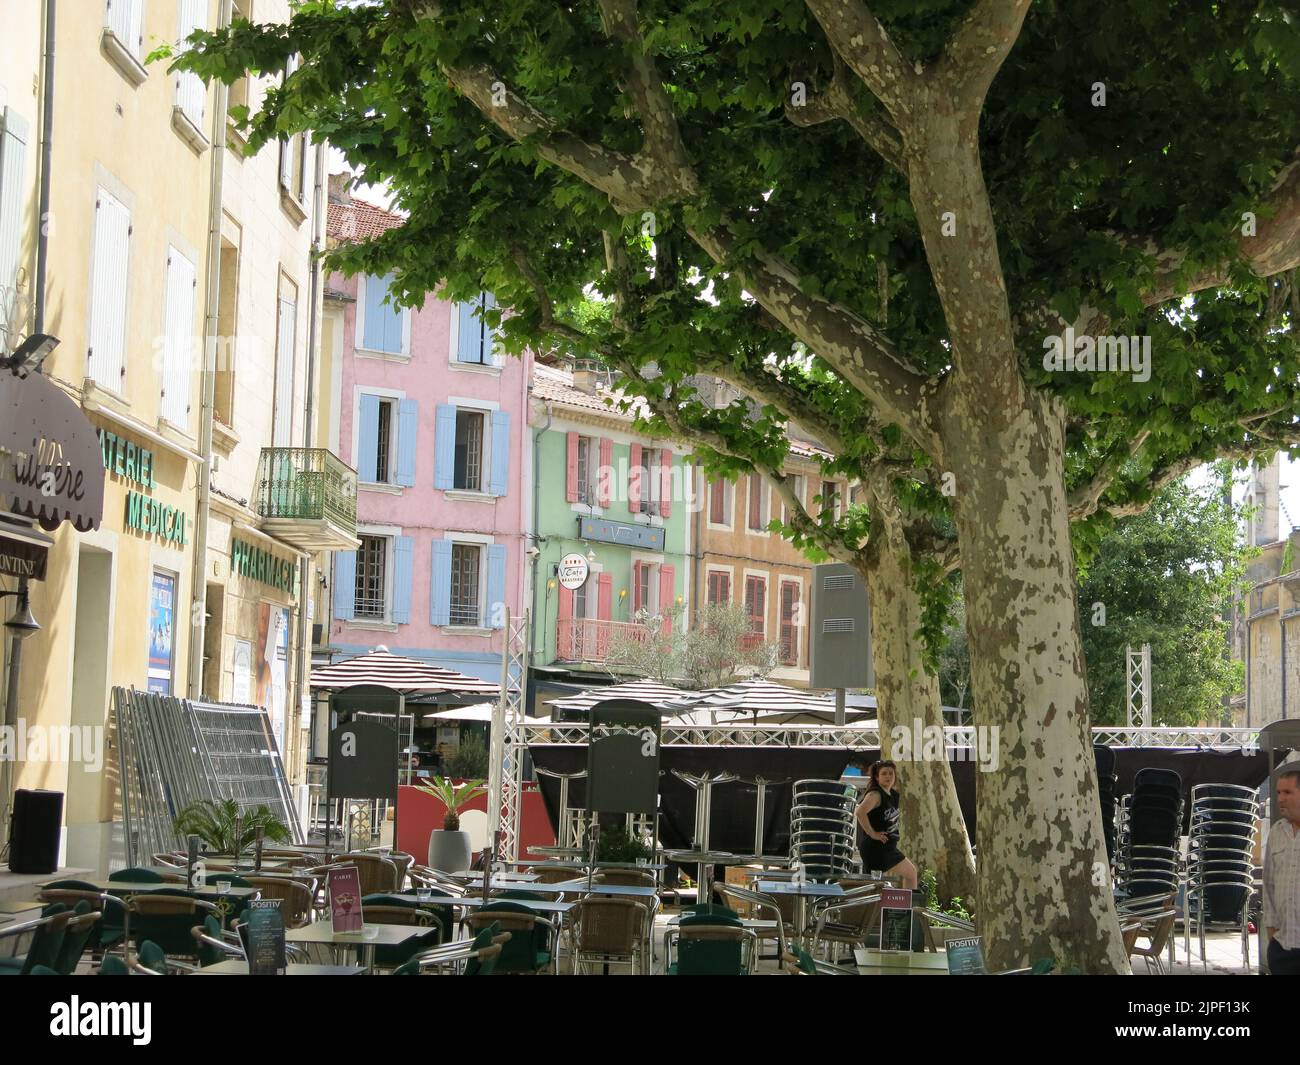 Brightly coloured buildings in the French historic city of Orange with cafes and restaurants in the tree-lined square. Stock Photo